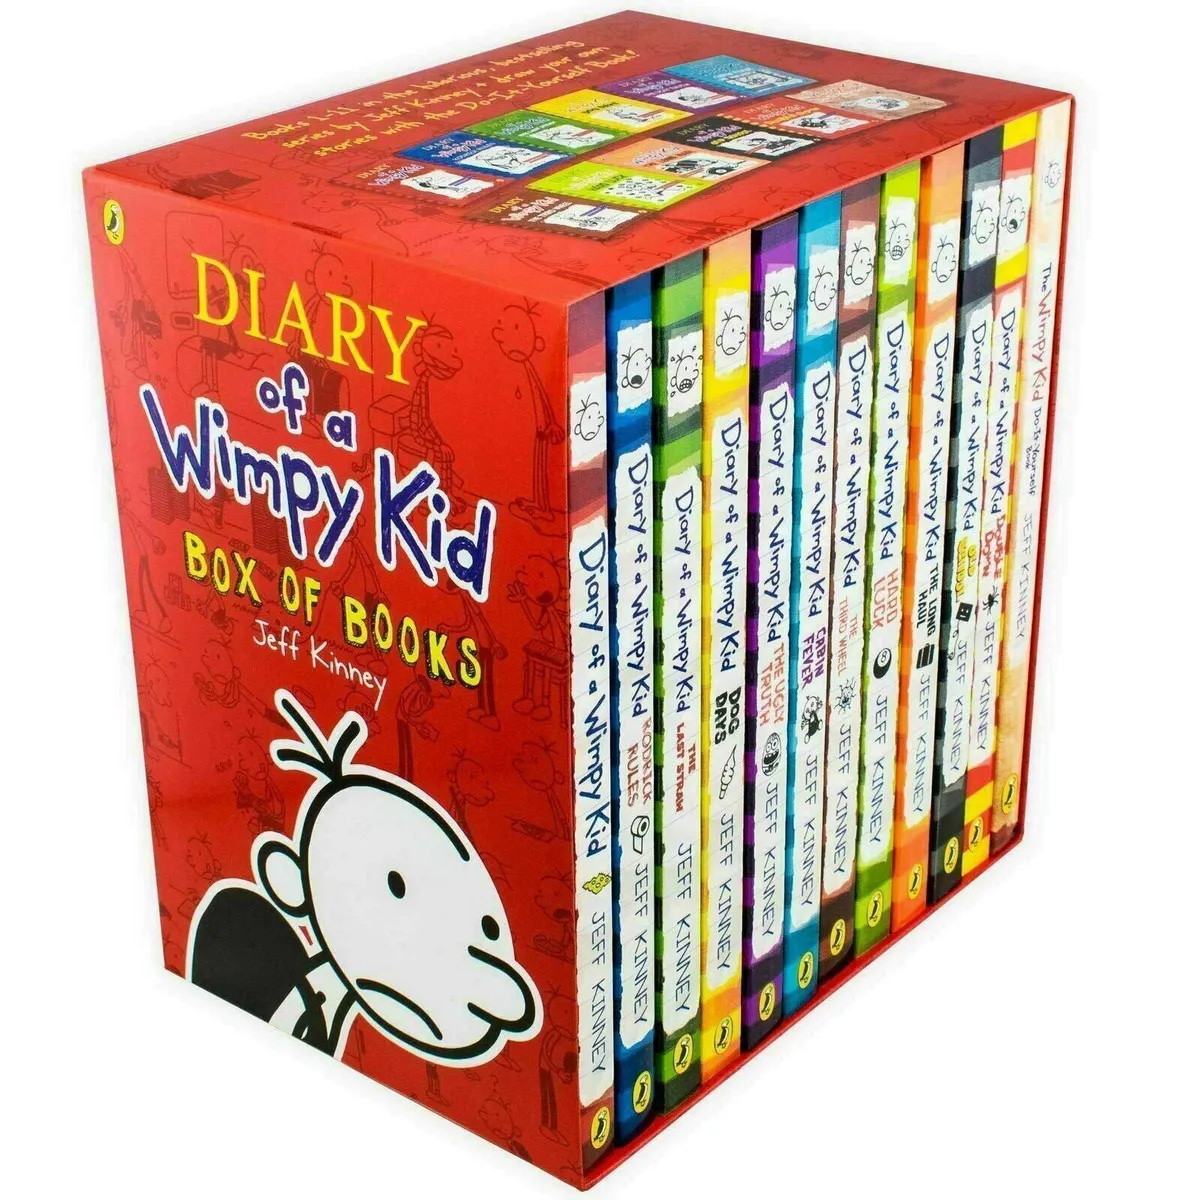 Diary of a Wimpy Kid Box of Books 12 Book Collection Set by Jeff Kinney 